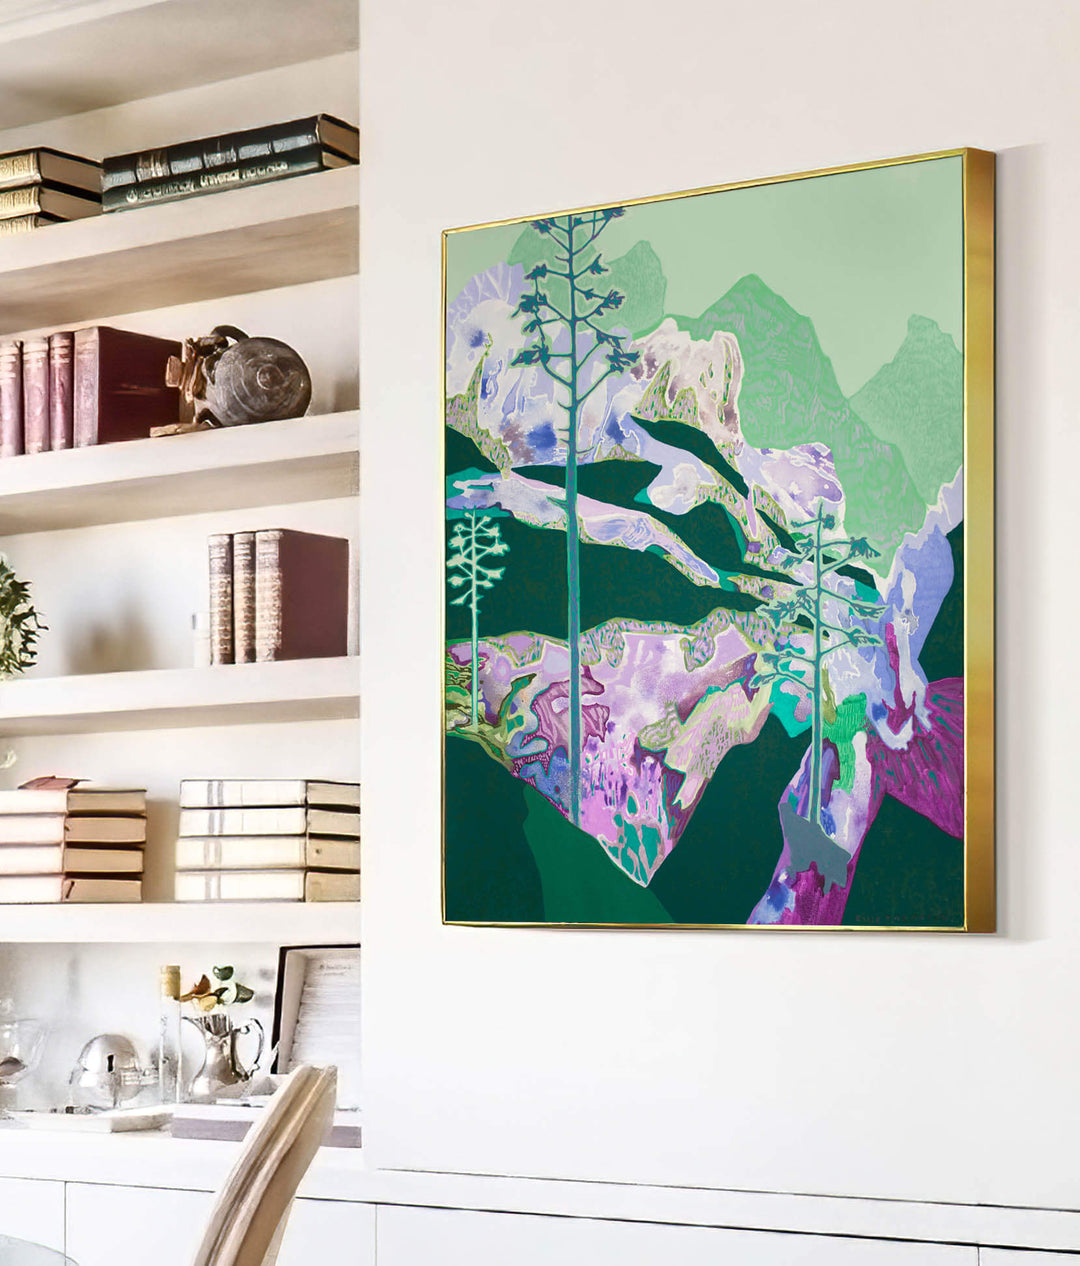 green and purple abstract mountain art in living room